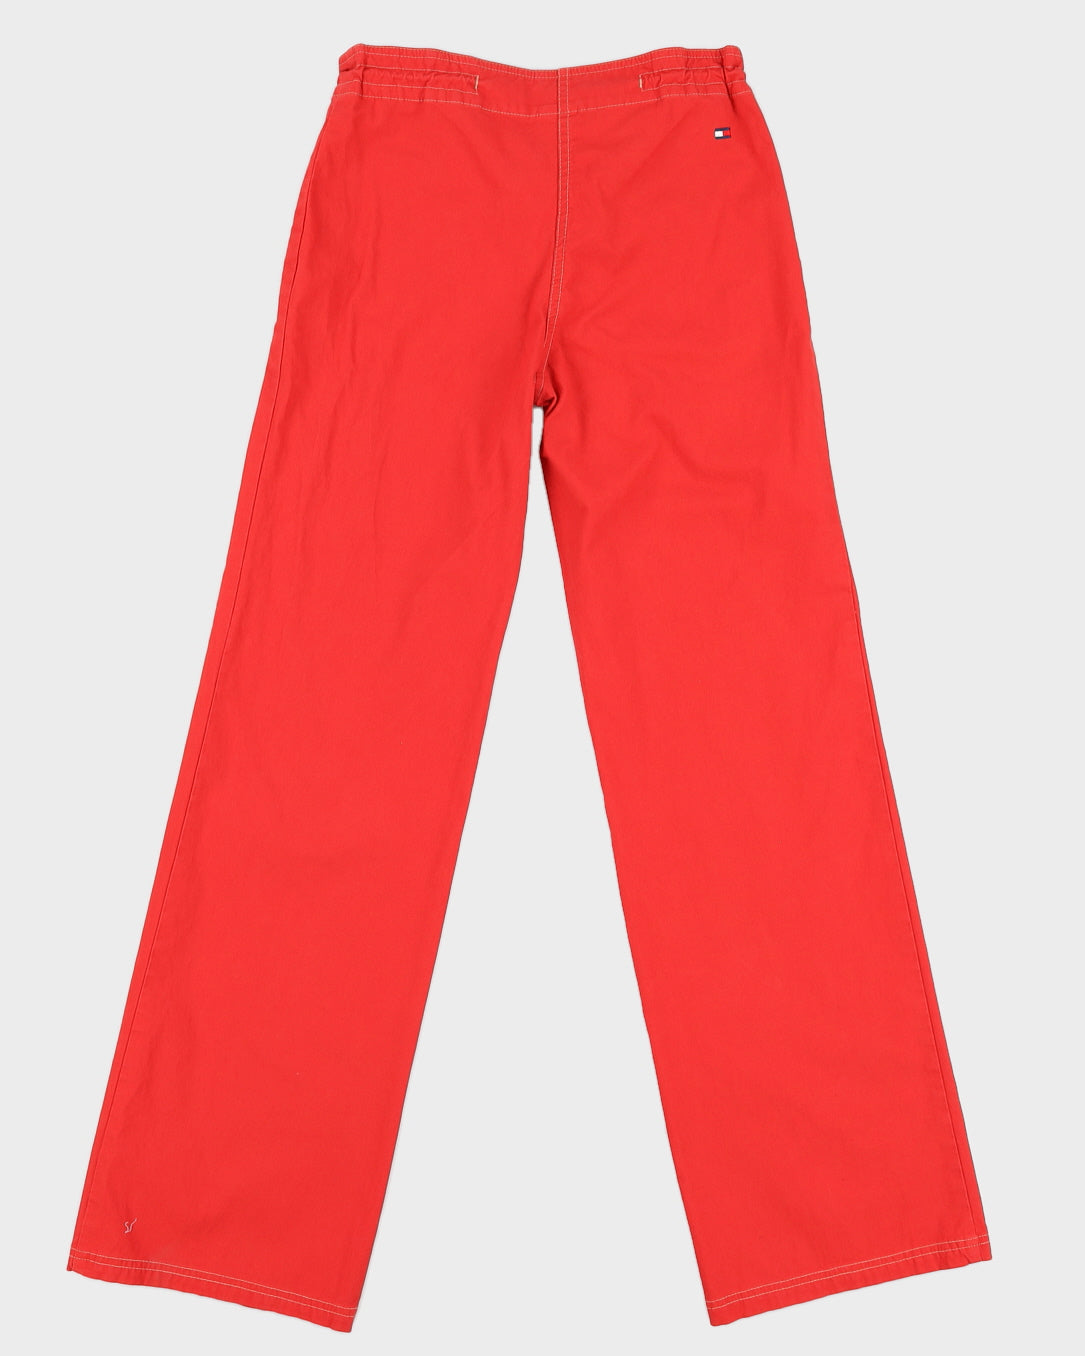 Y2K 00s Tommy Hilfiger Red Toggle Waistband Trousers - S